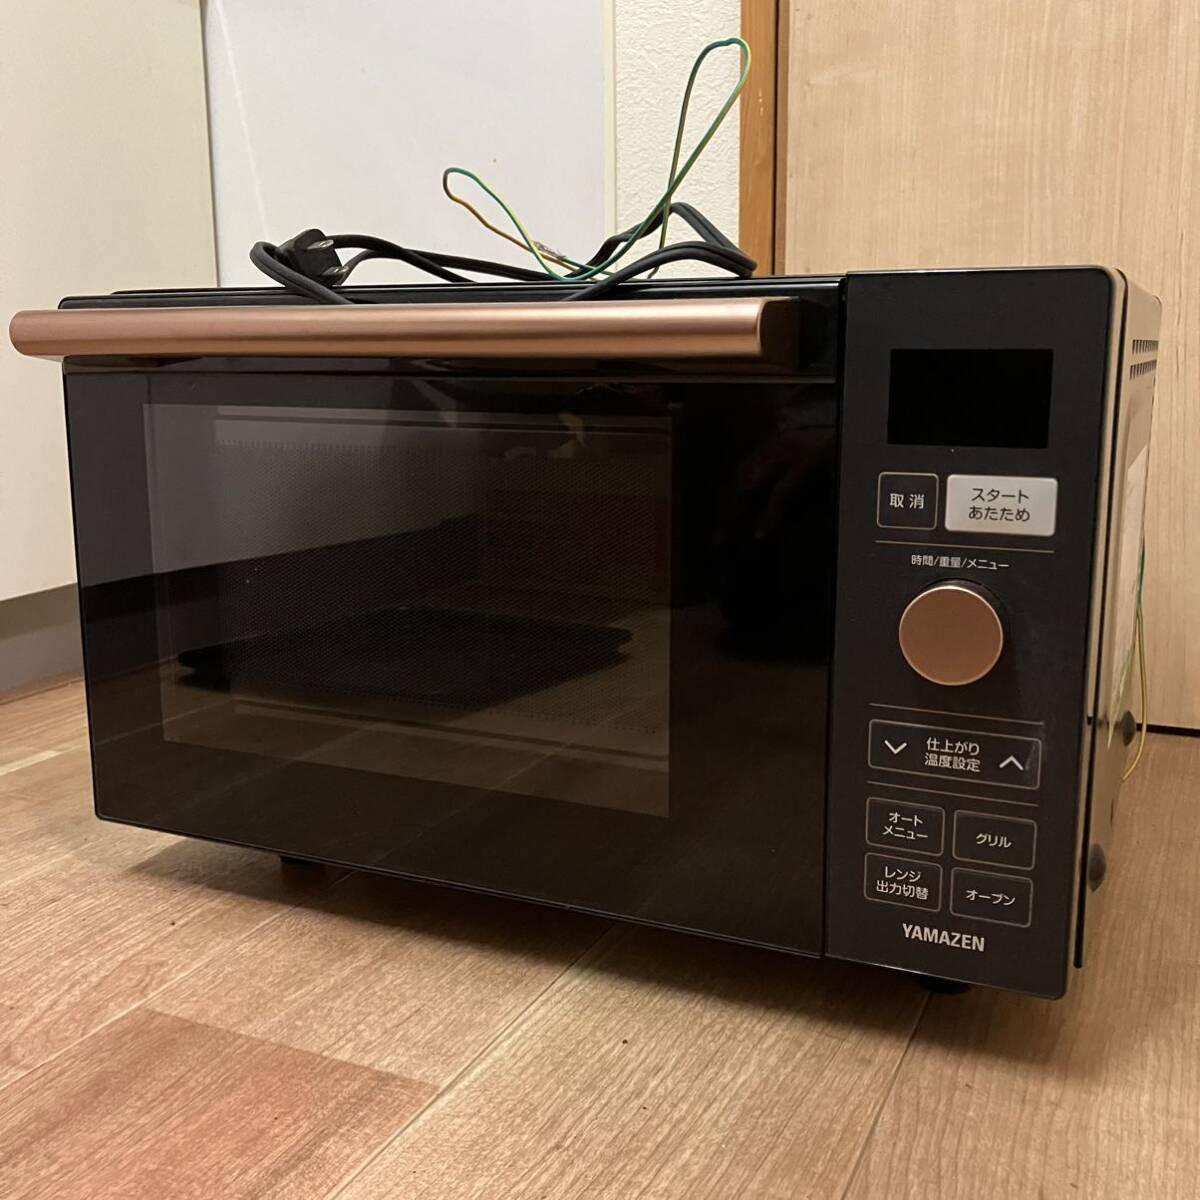  dirt equipped operation goods 21 year made YAMAZEN mountain . microwave oven microwave oven YRP-F180V(B)